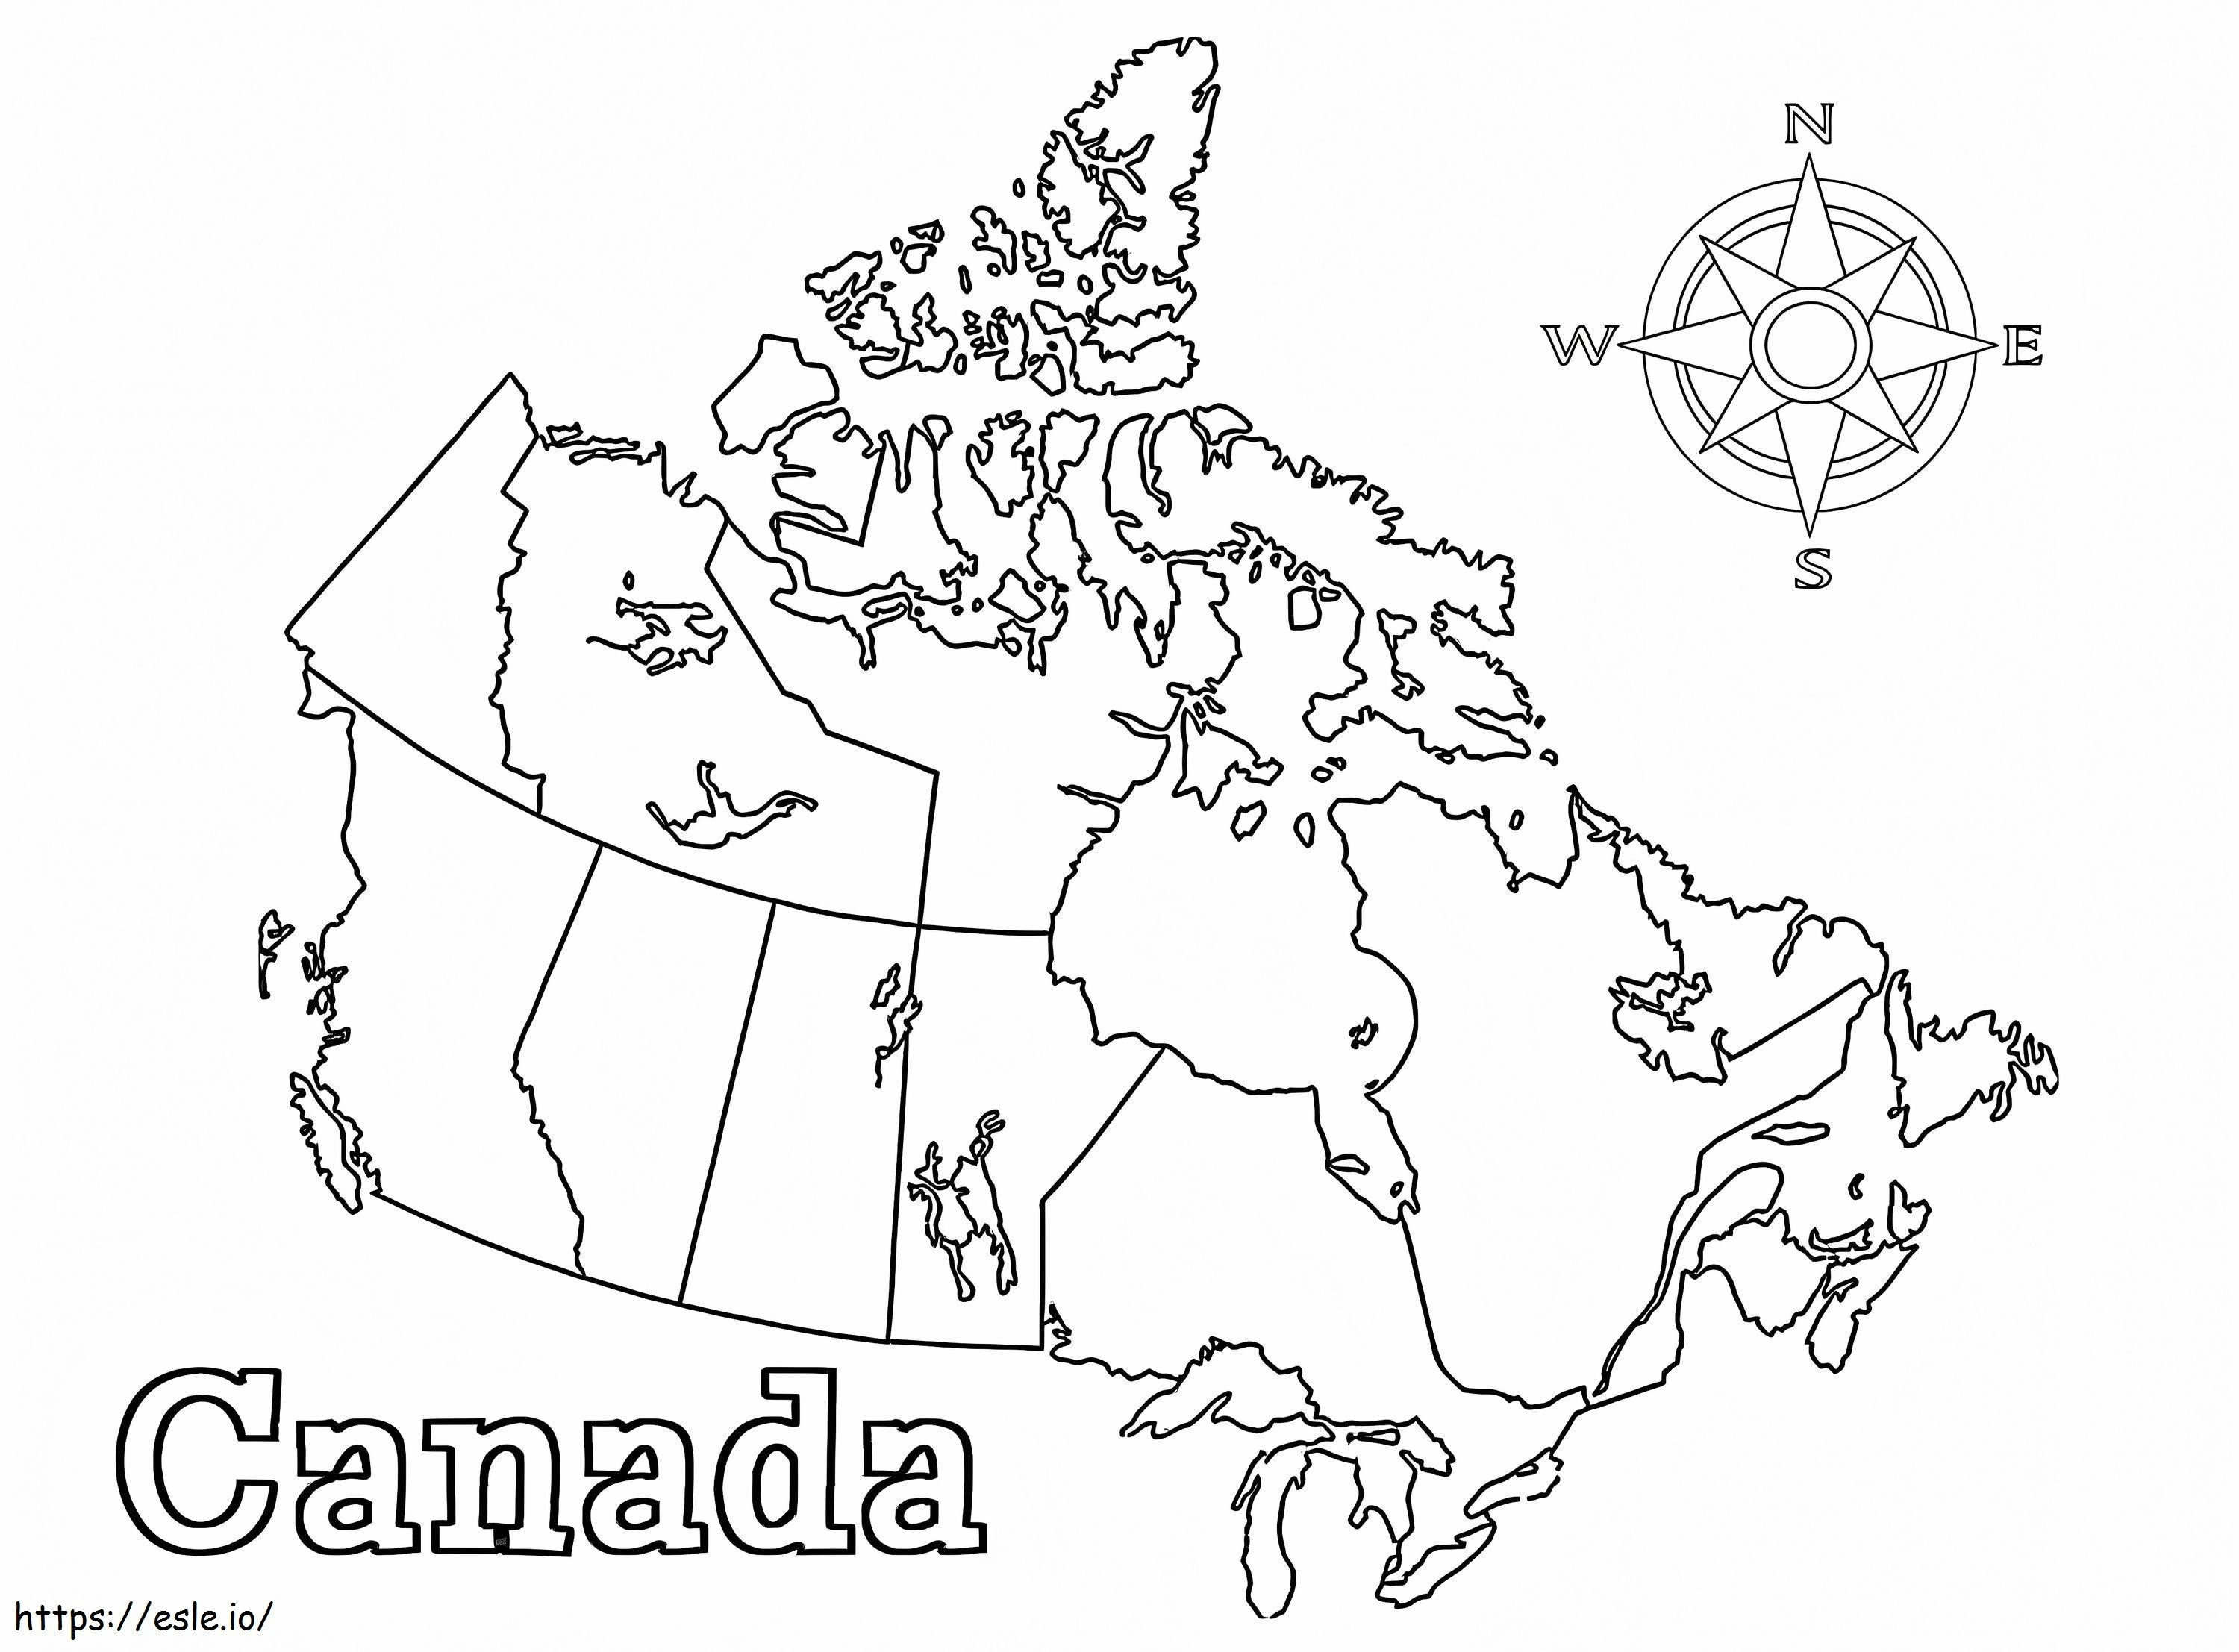 Canada'S Map coloring page